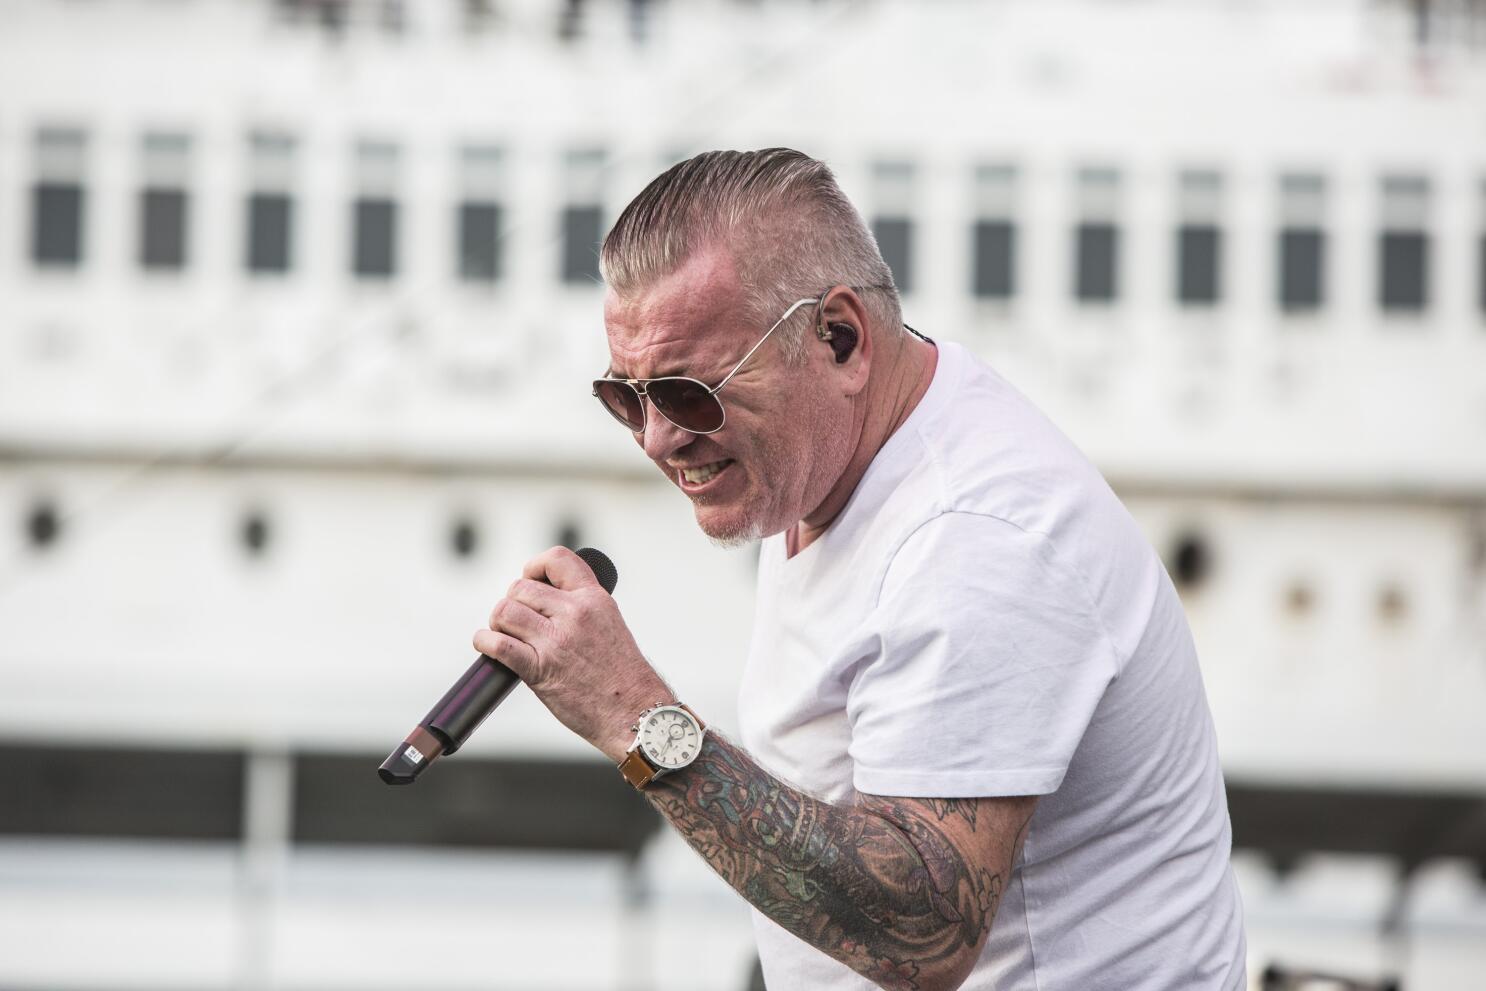 Smash Mouth Frontman Steve Harwell Quits Band After Bizarre Onstage Rant